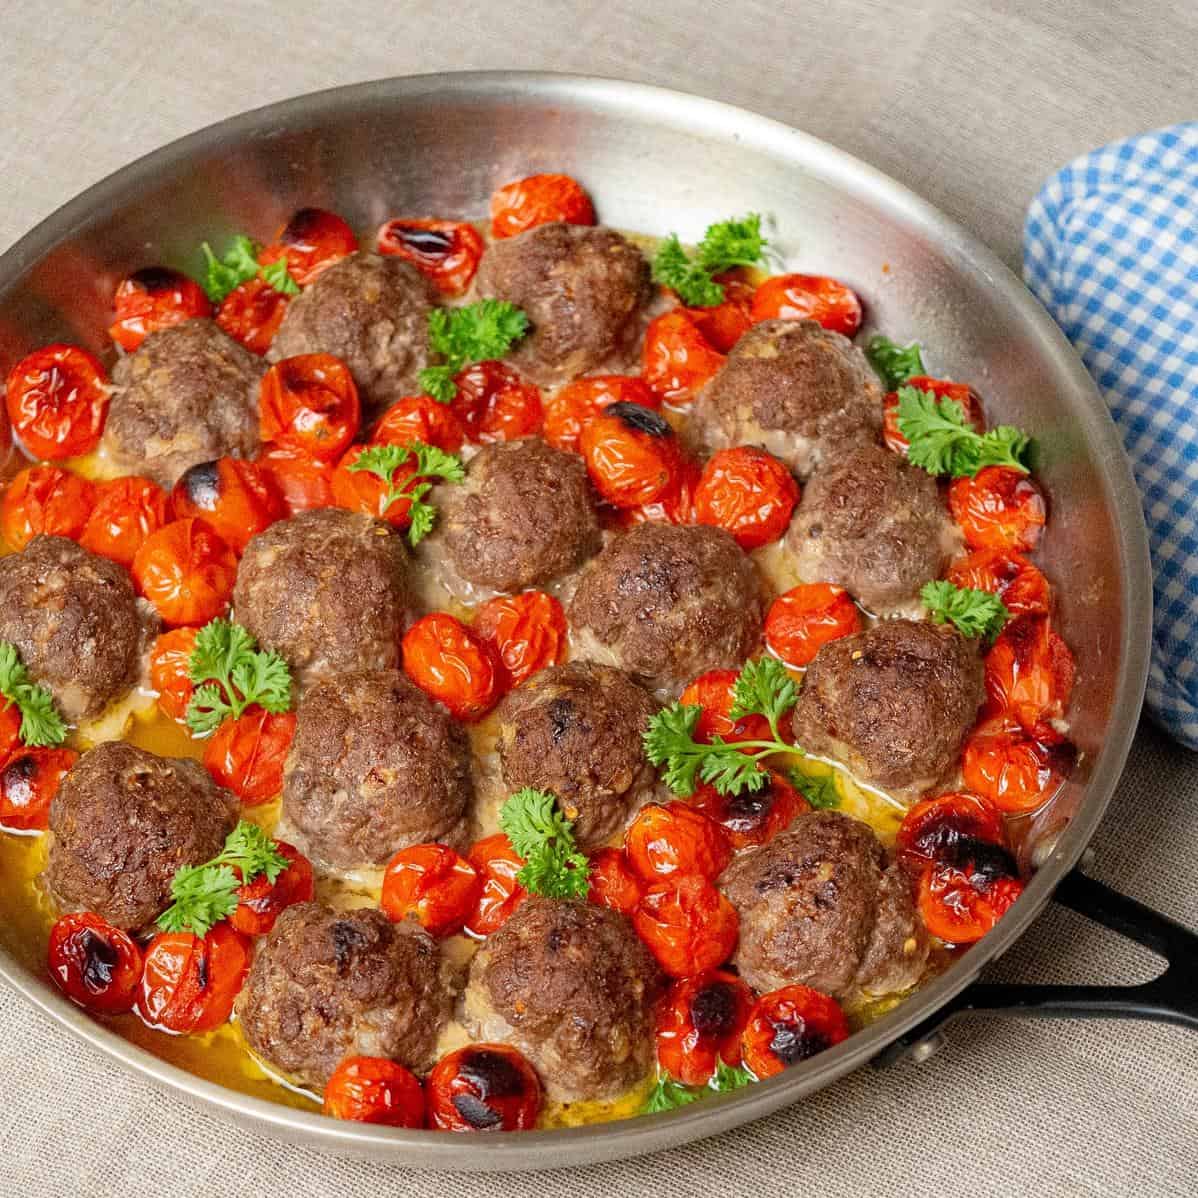  Perfectly seasoned meatballs, flavored with fresh herbs, are combined with juicy cherry tomatoes for a delicious twist on the classic dish.